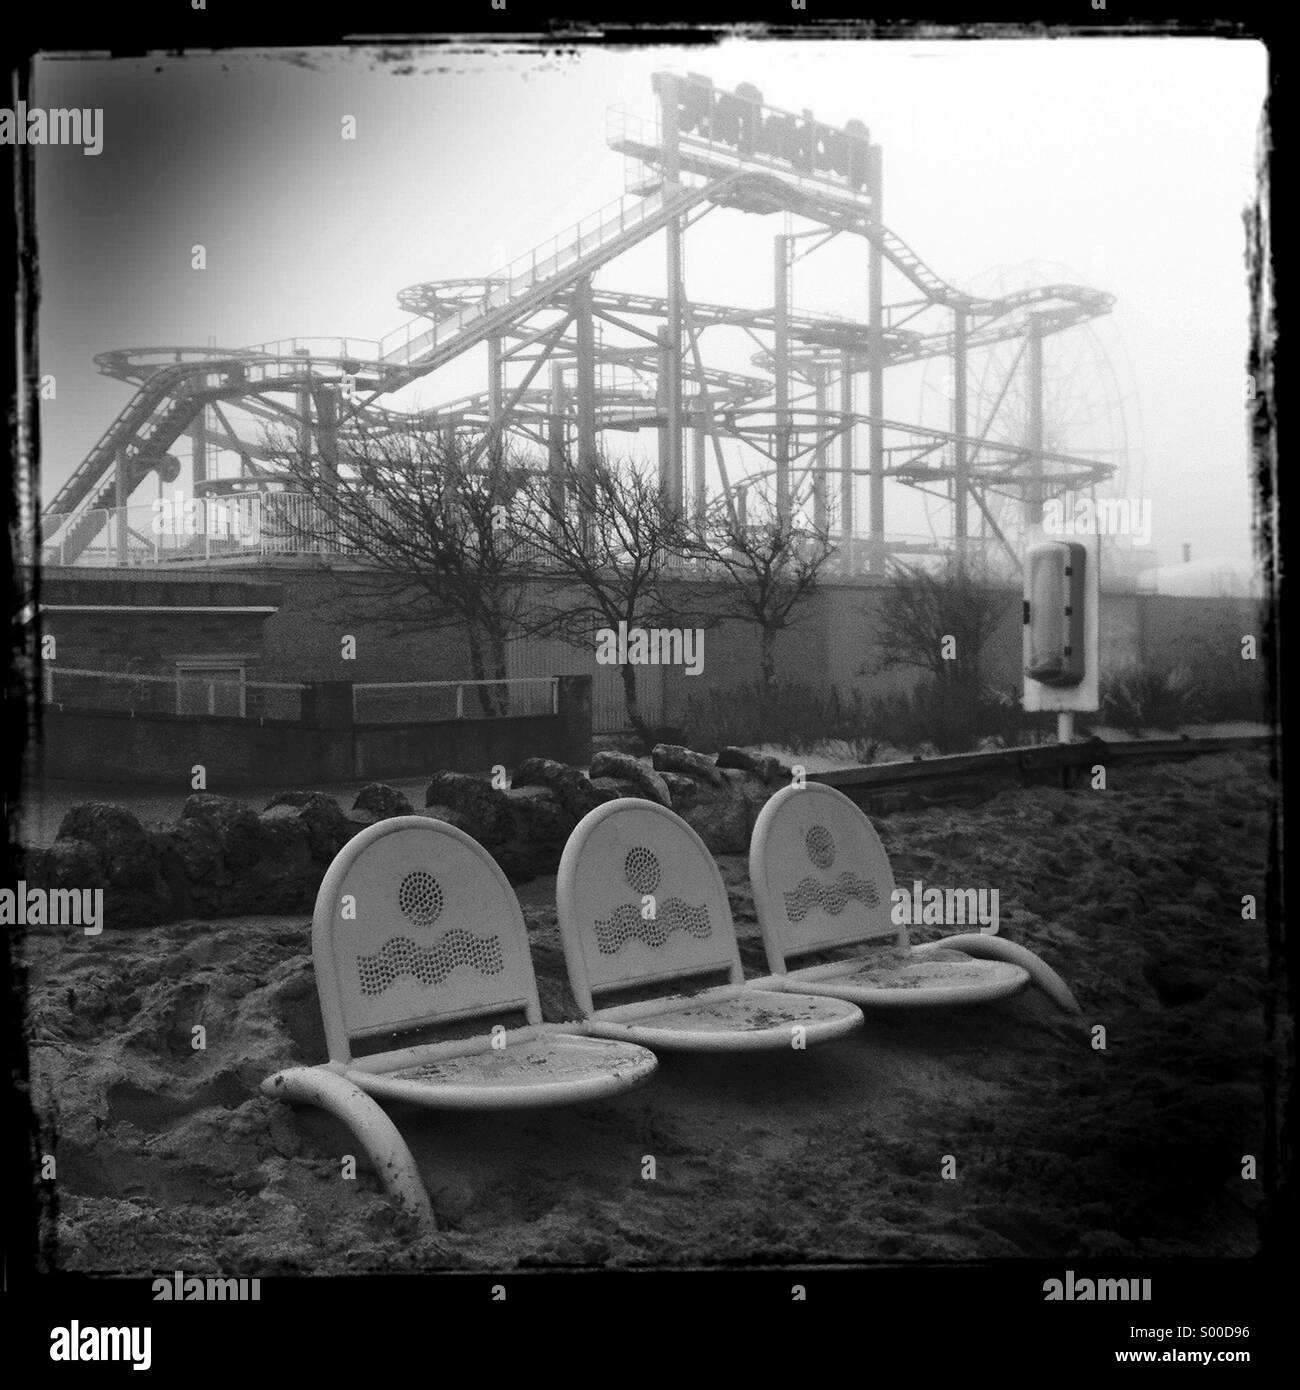 The fun fair at Skegness, England on a misty winter day. Stock Photo